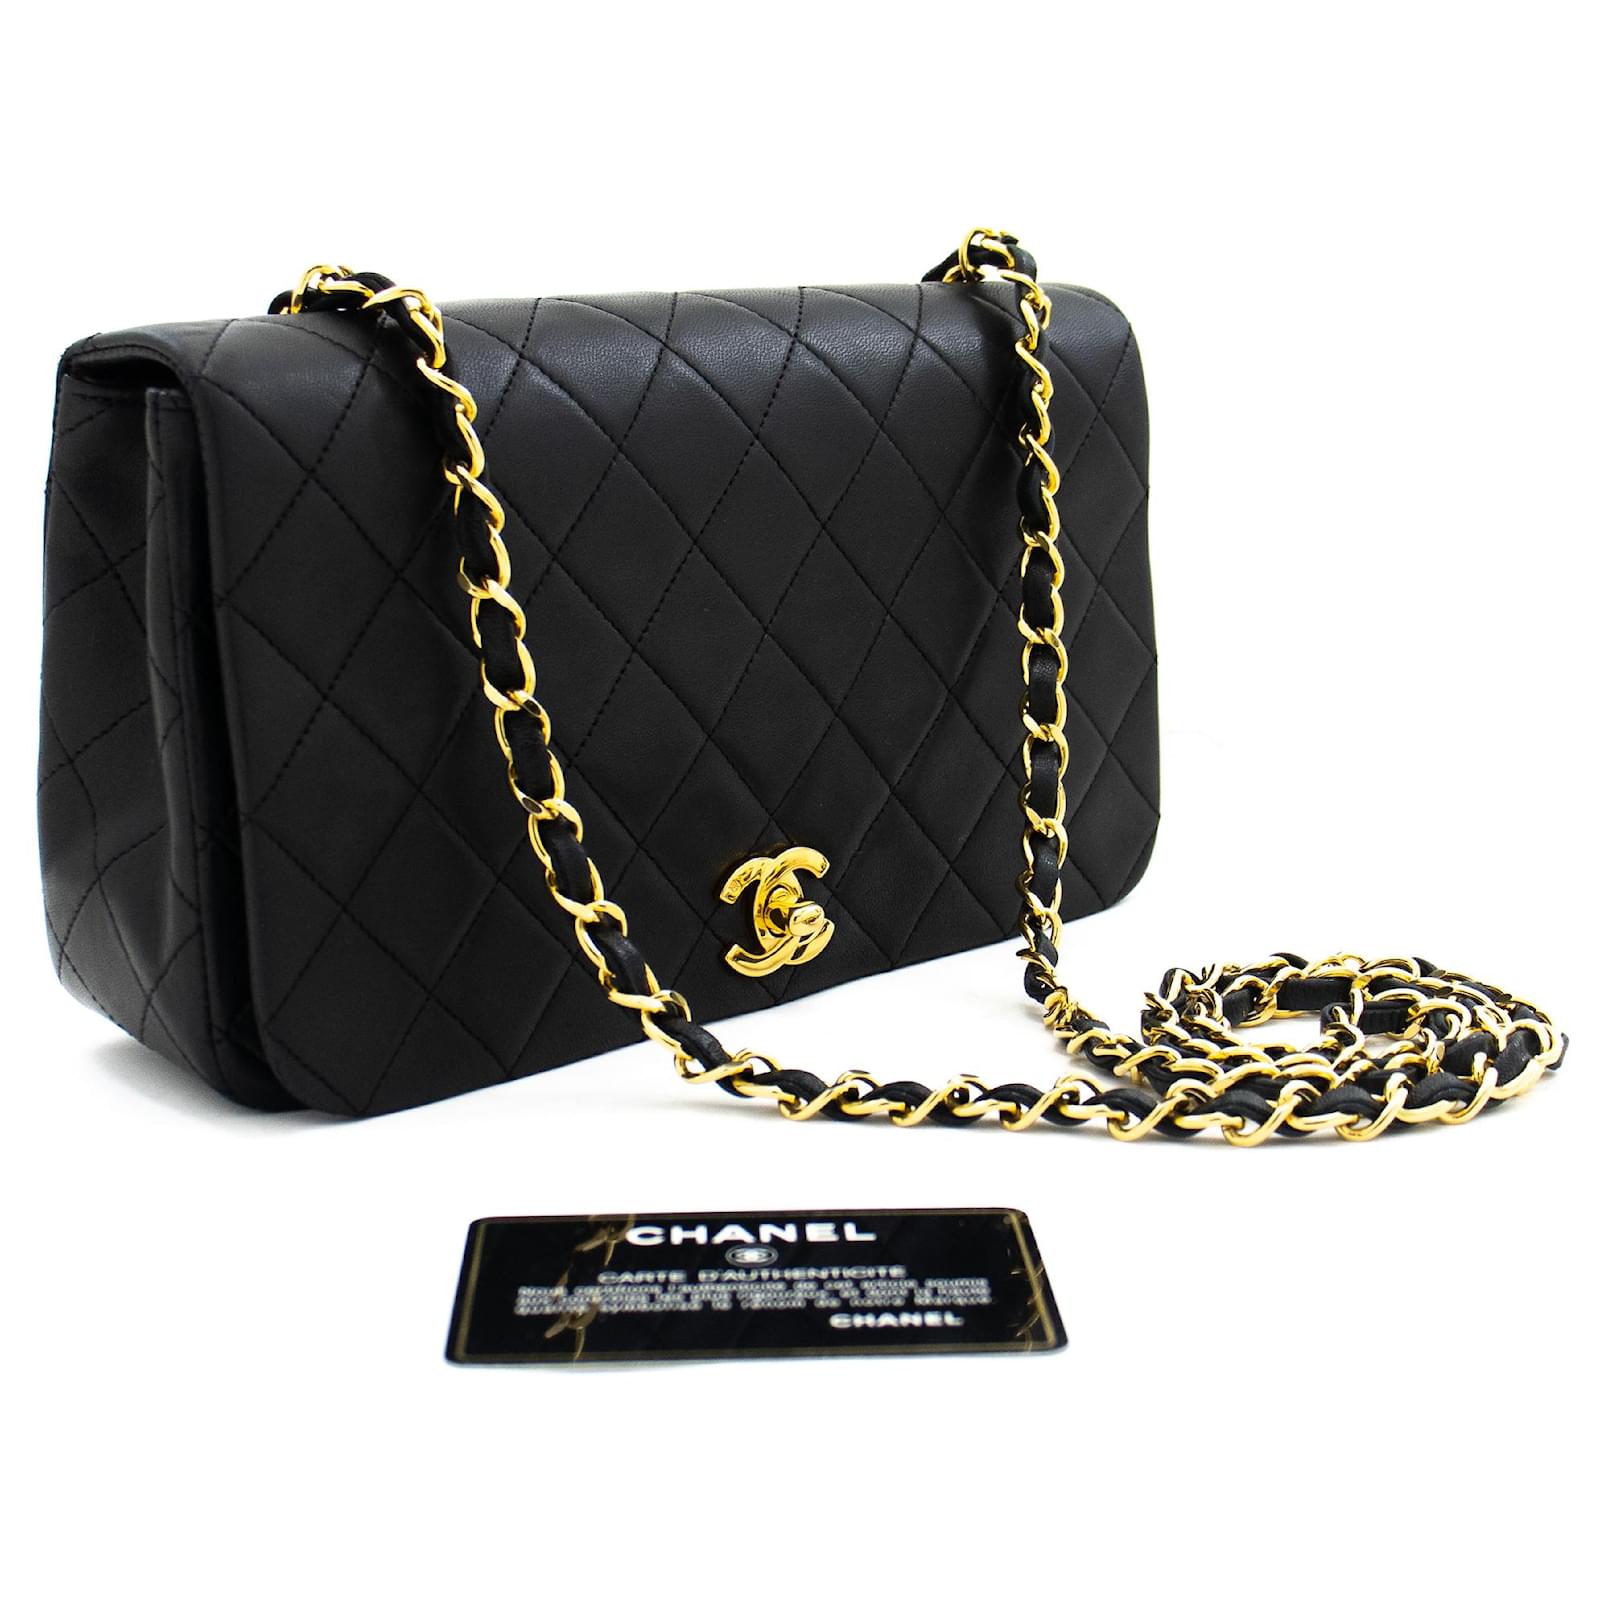 CHANEL Full Flap Chain Shoulder Bag Crossbody Black Quilted Lamb